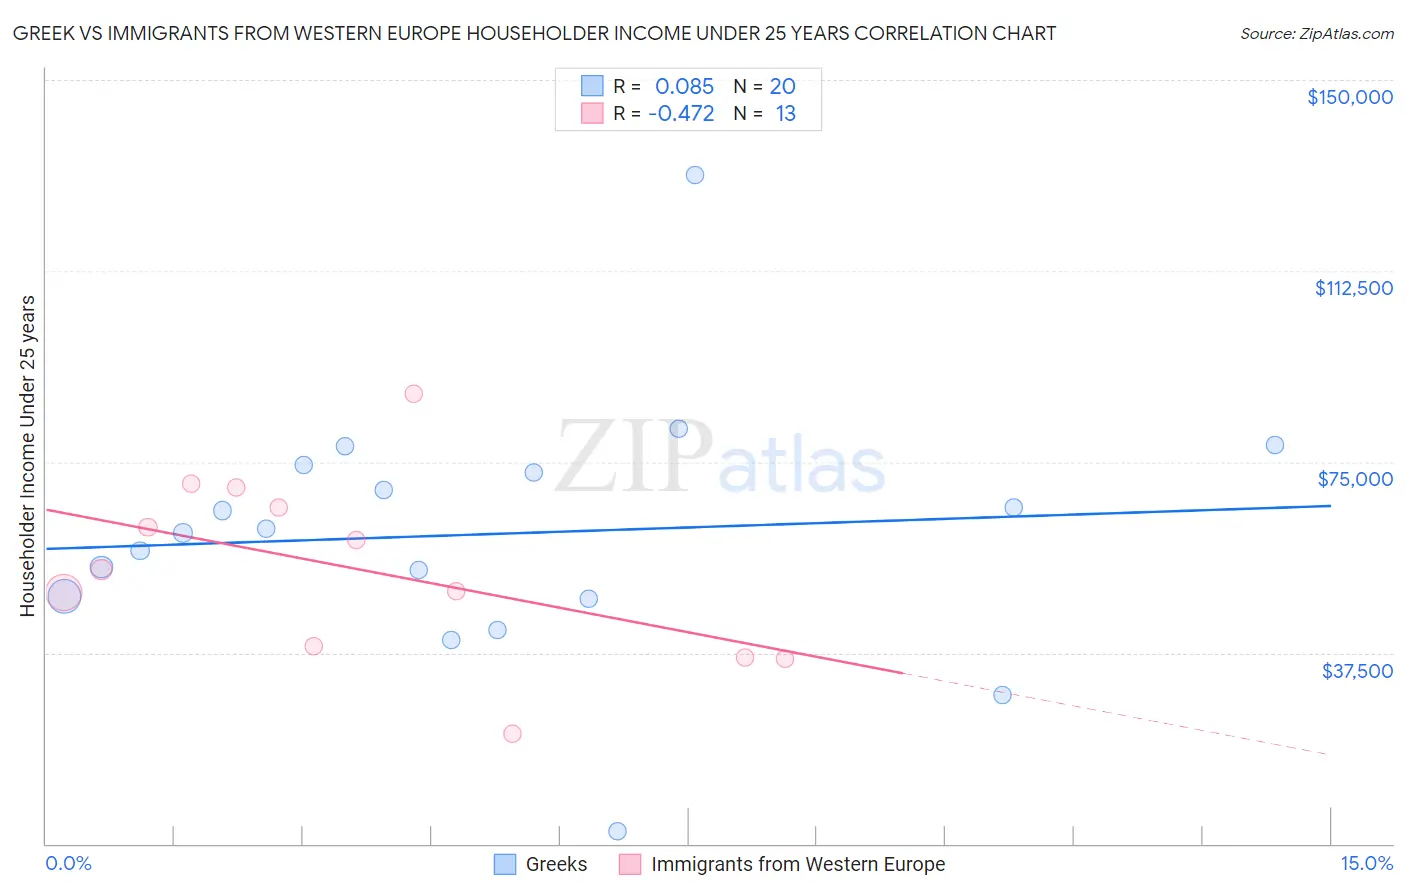 Greek vs Immigrants from Western Europe Householder Income Under 25 years